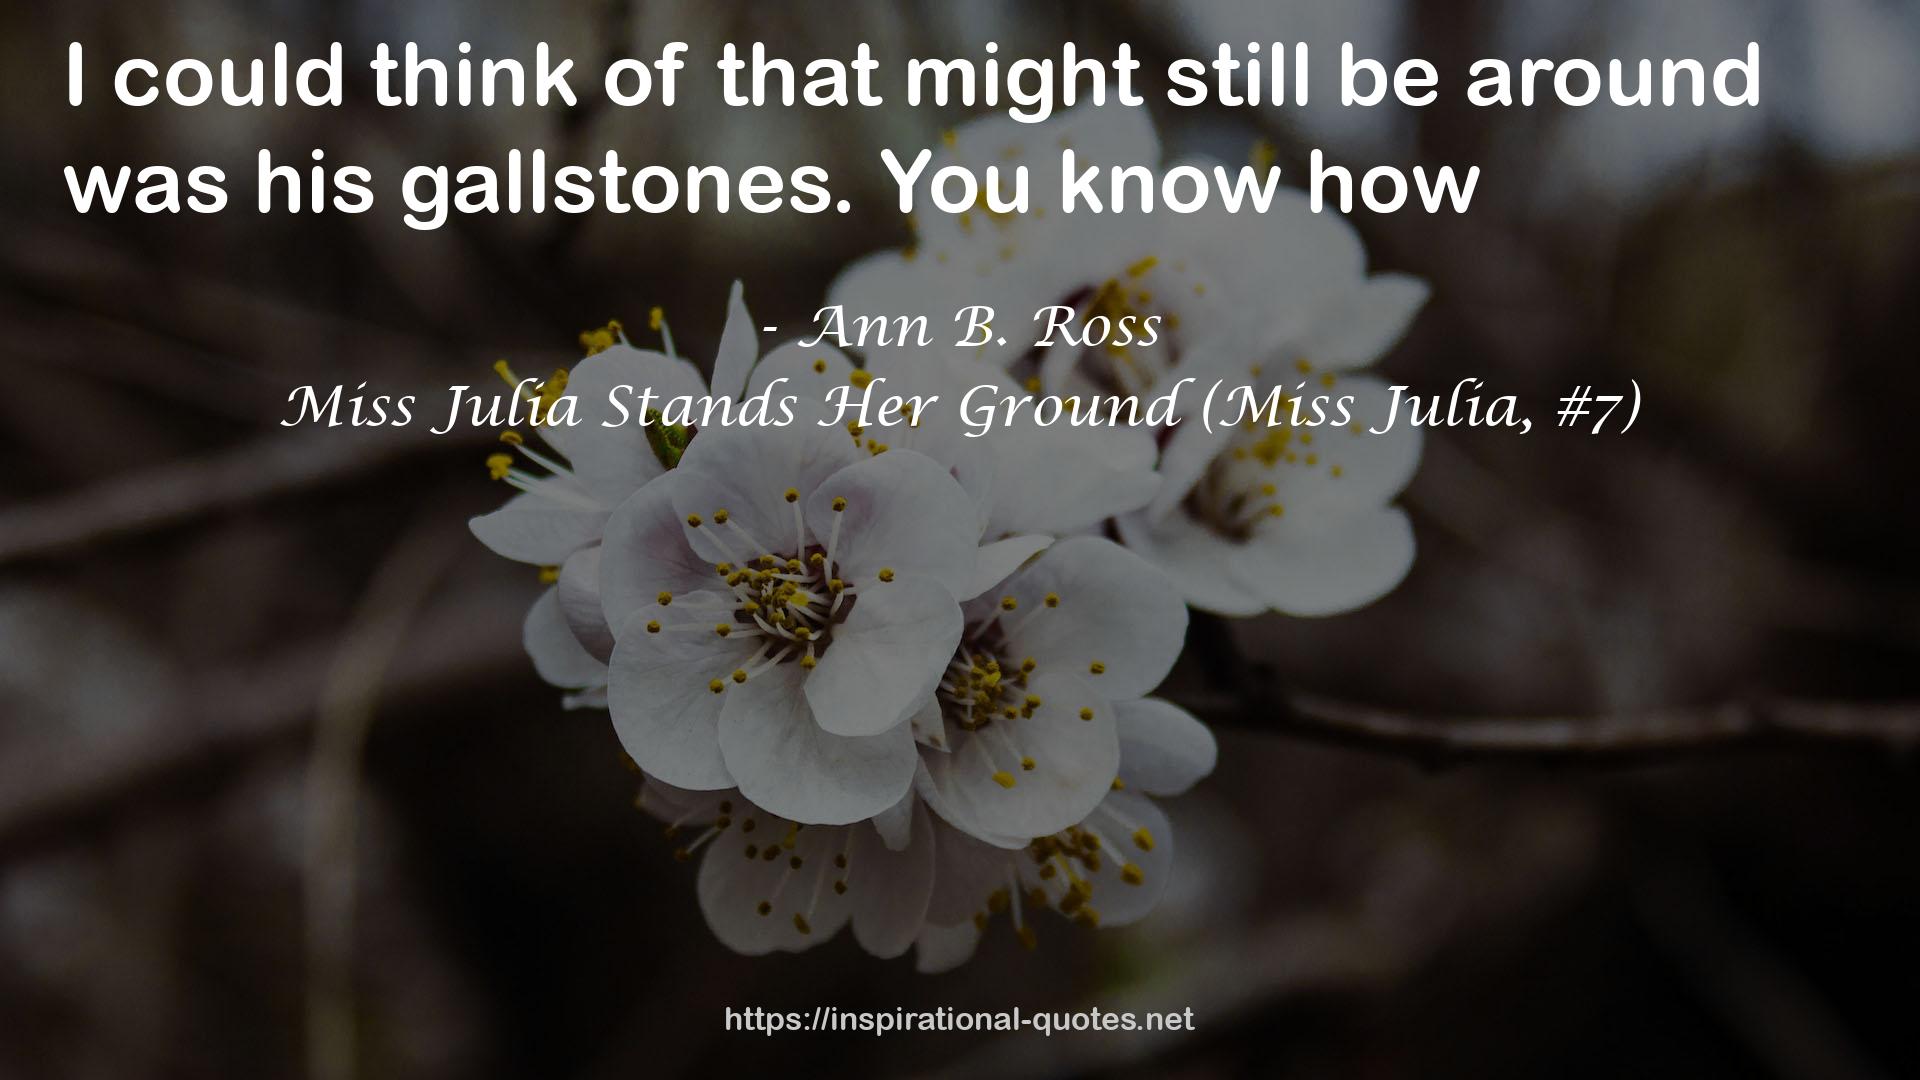 Miss Julia Stands Her Ground (Miss Julia, #7) QUOTES